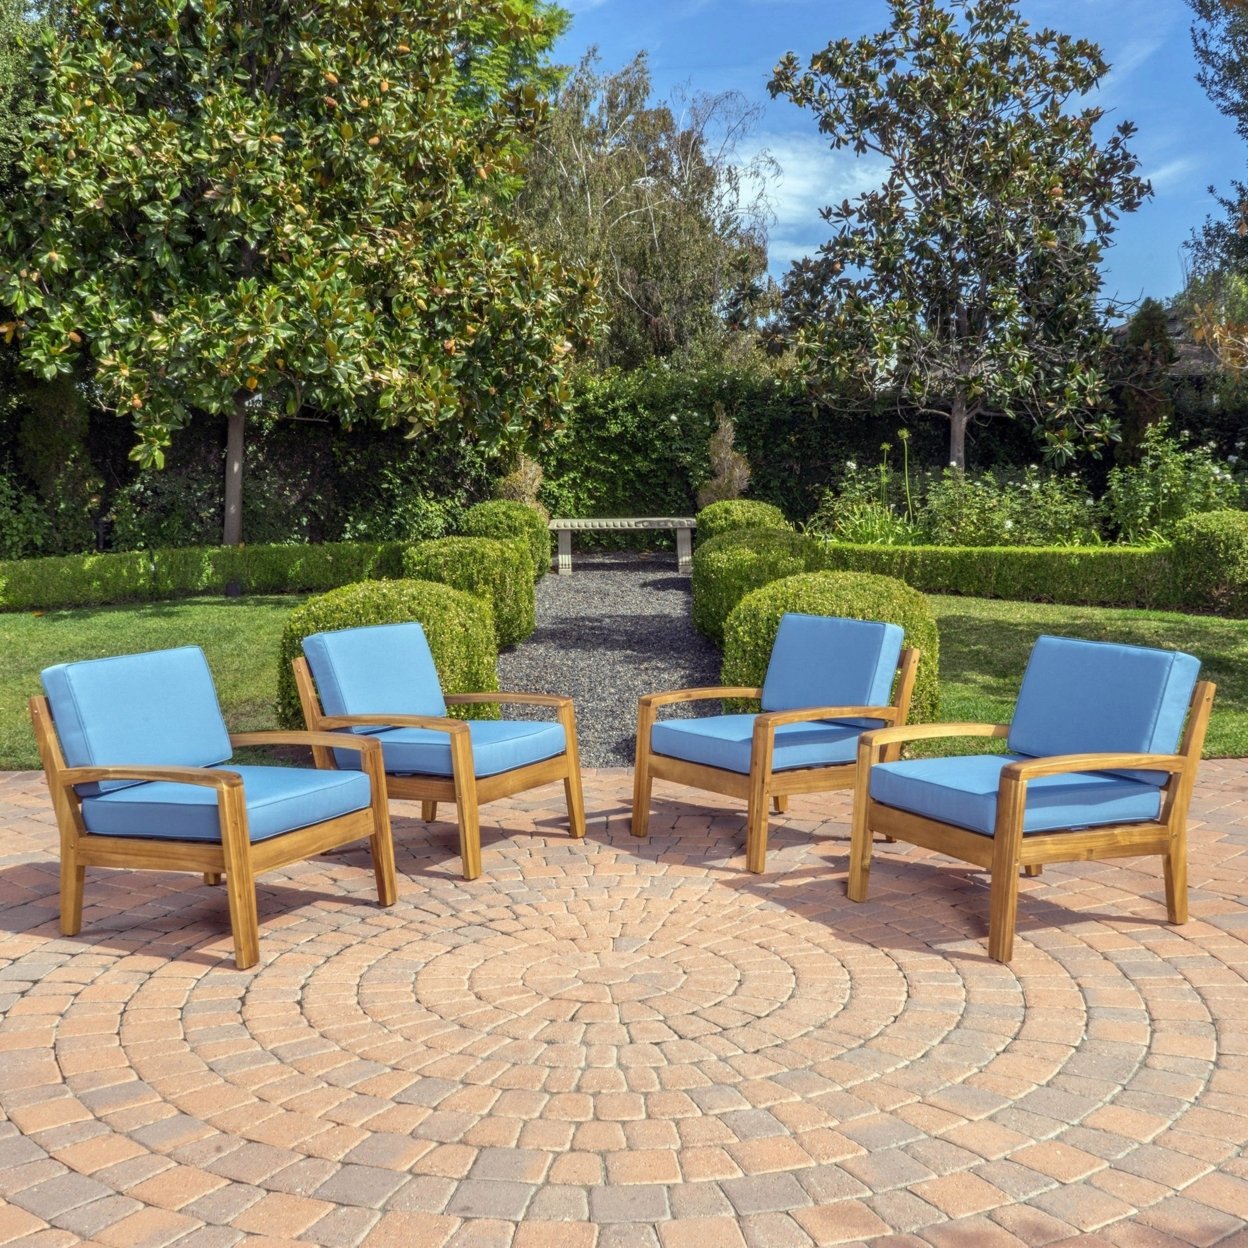 Parma Outdoor Acacia Wood Club Chairs With Cushions (Set Of 4) - Blue